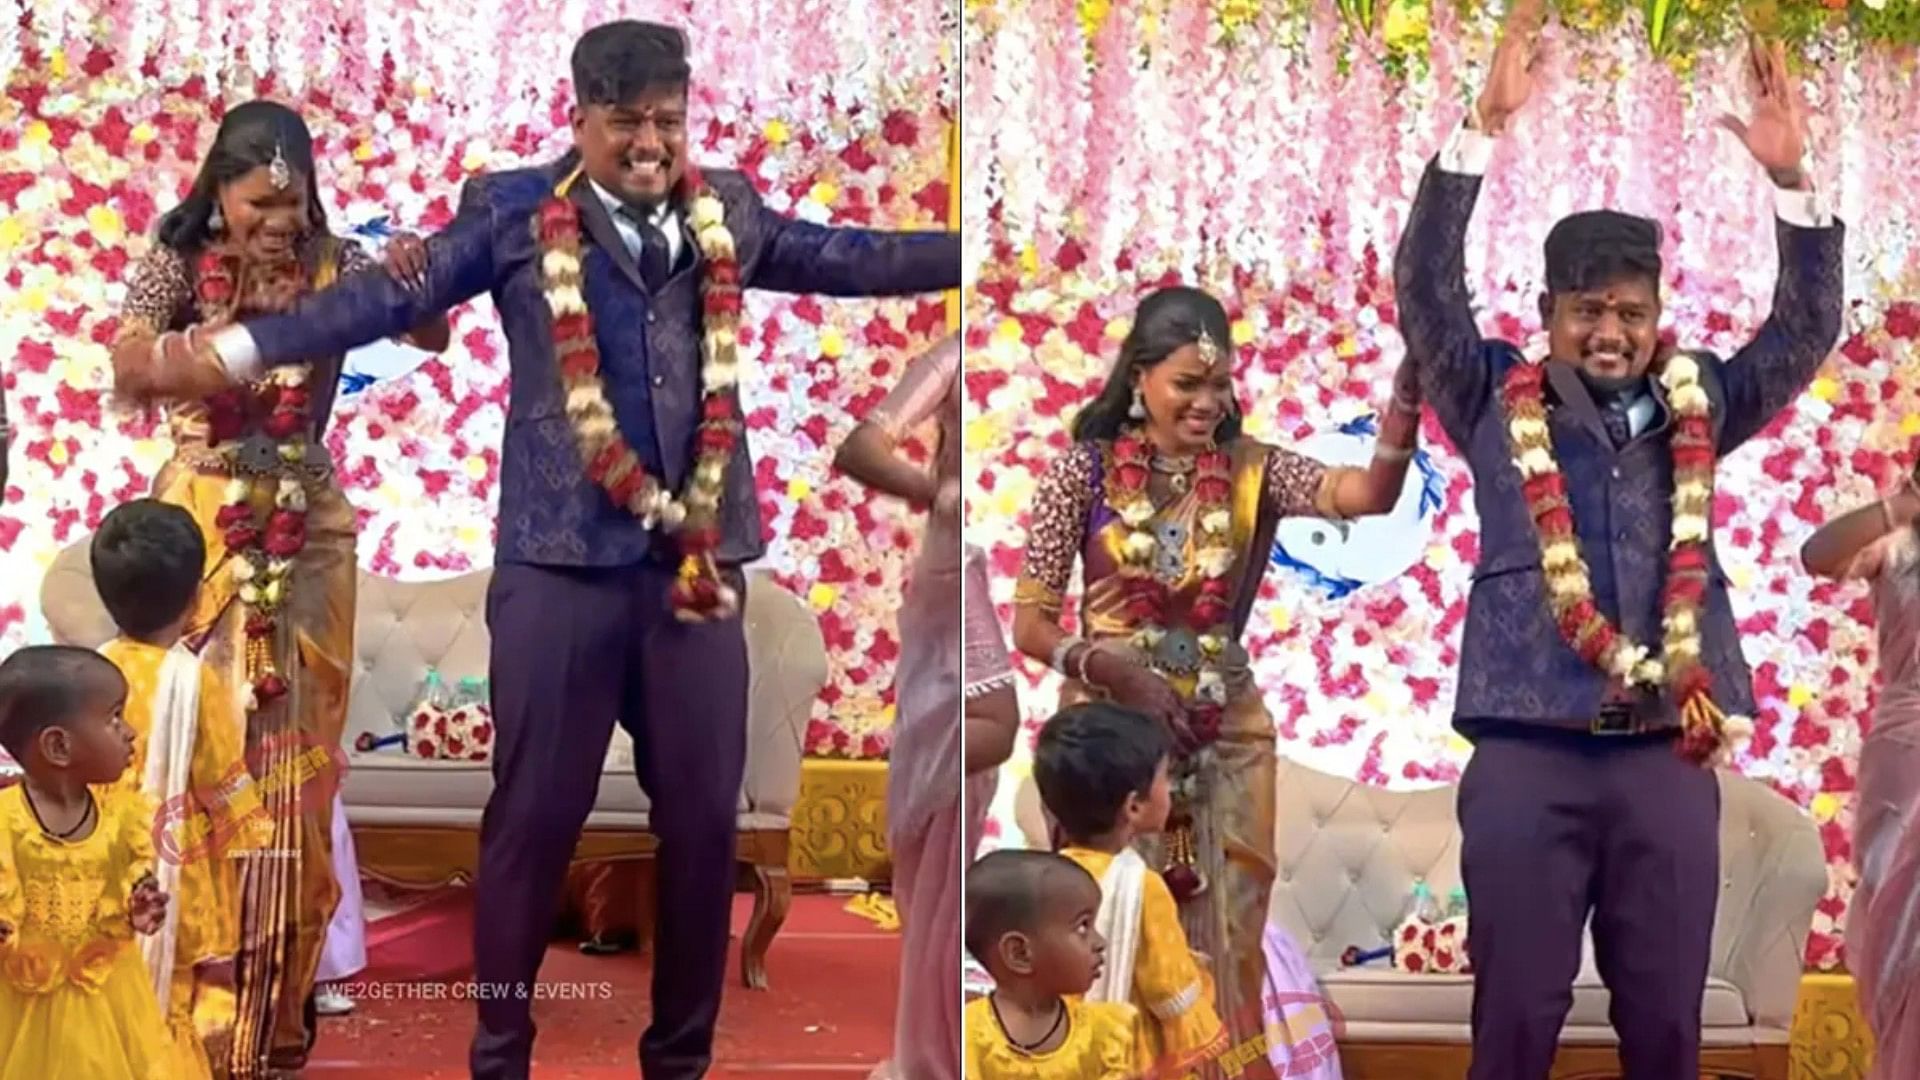 pt teacher did funny dance in his wedding video going viral on social media